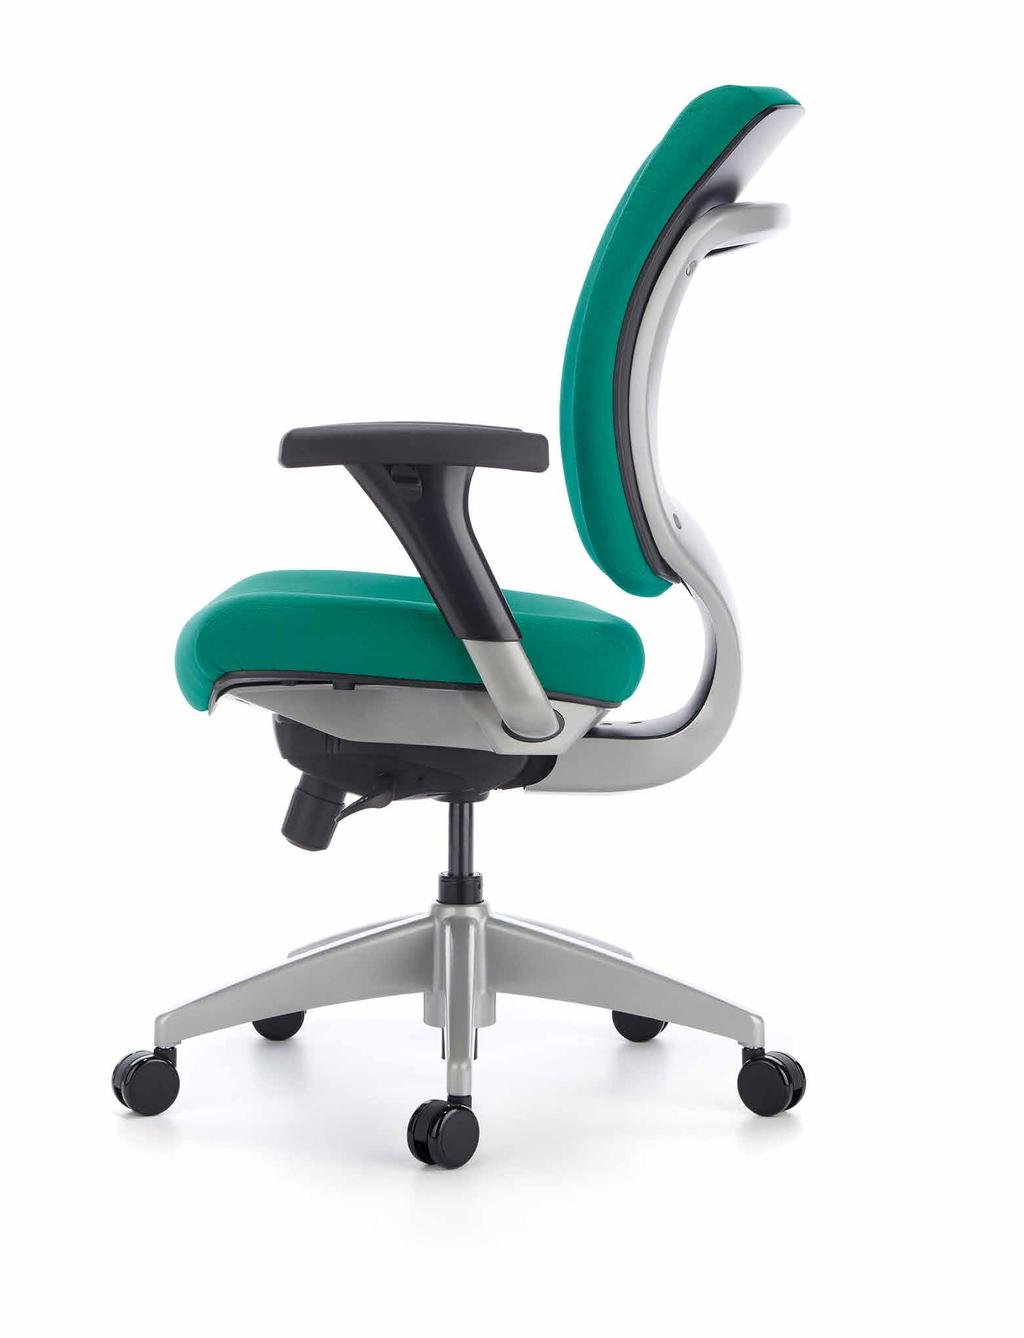 CRAMER The Leading Provider of Performance Seating for Med-Tech Environments The Ever Series AN INNOVATIVE NEW APPROACH TO INTENSIVE-USE SEATING Featuring